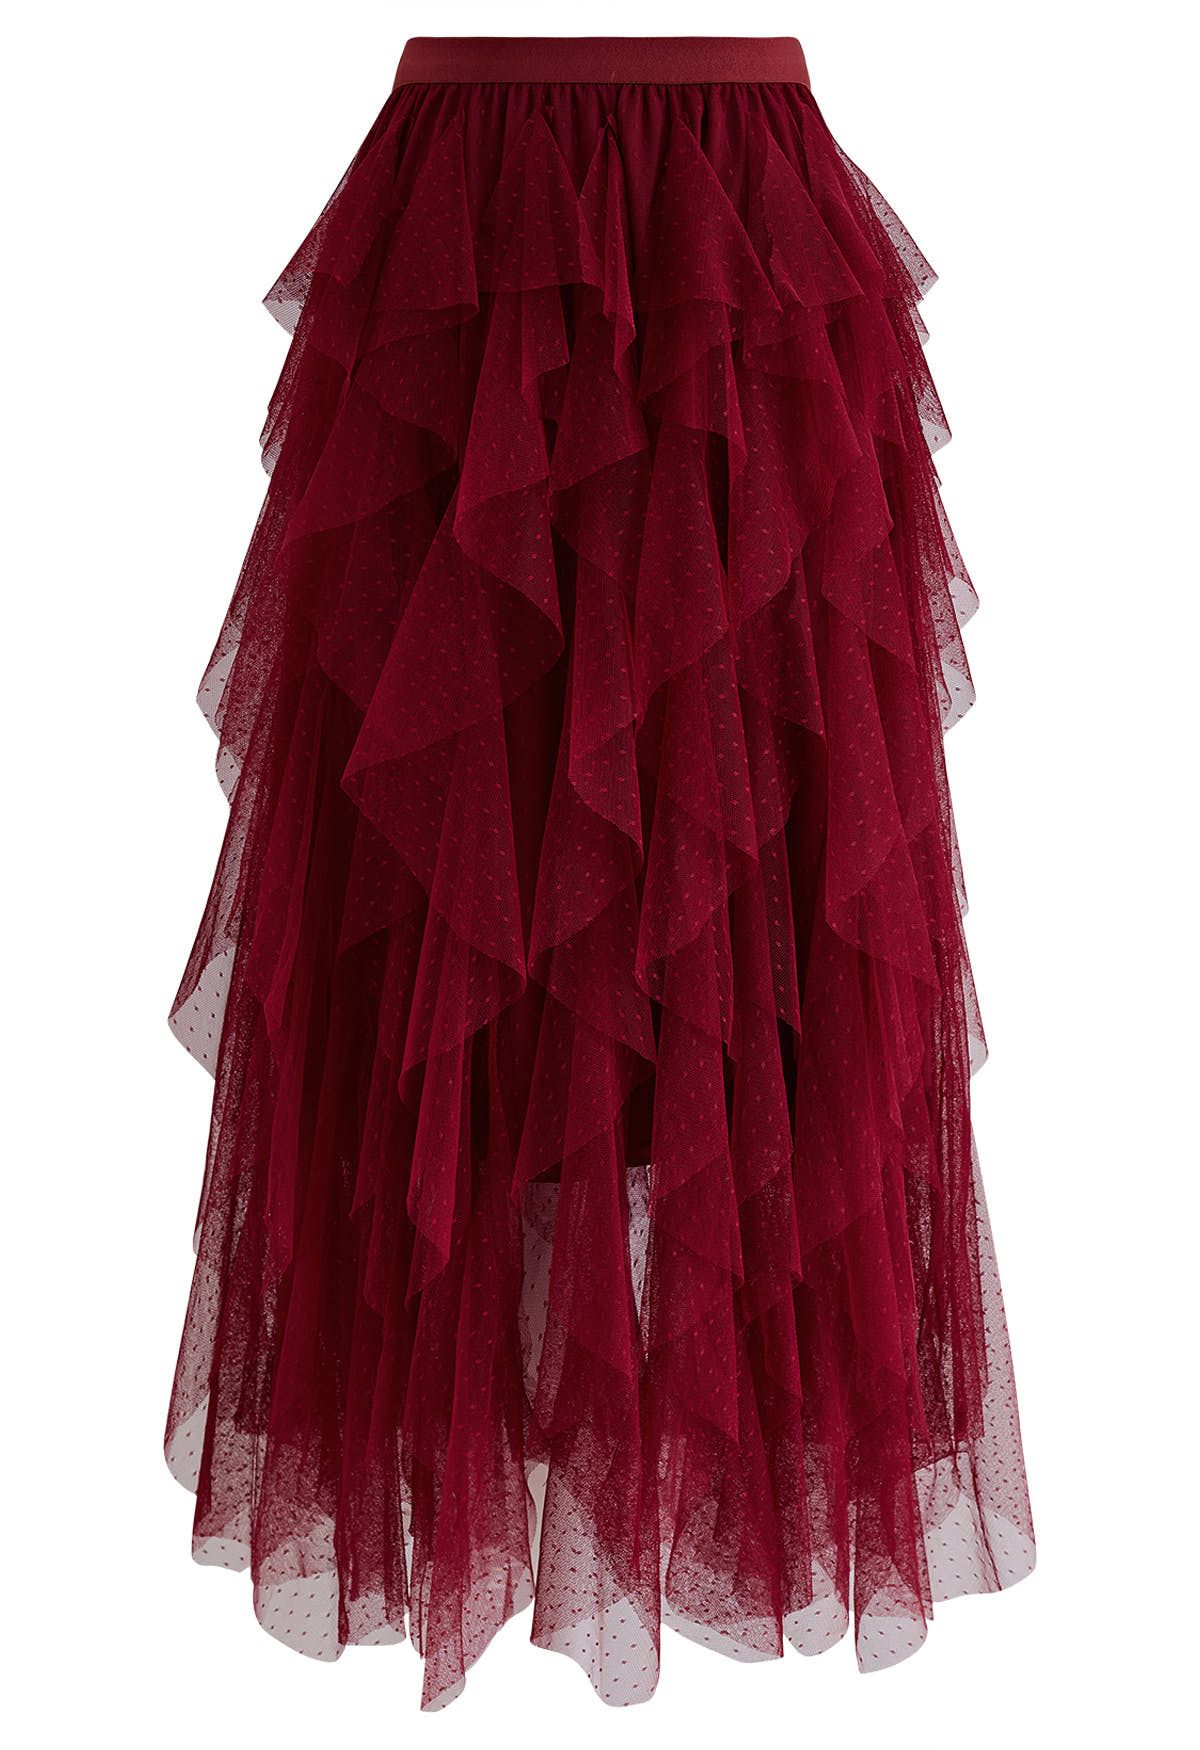 Dots Full Ruffled Tulle Skirt in Red - Retro, Indie and Unique Fashion